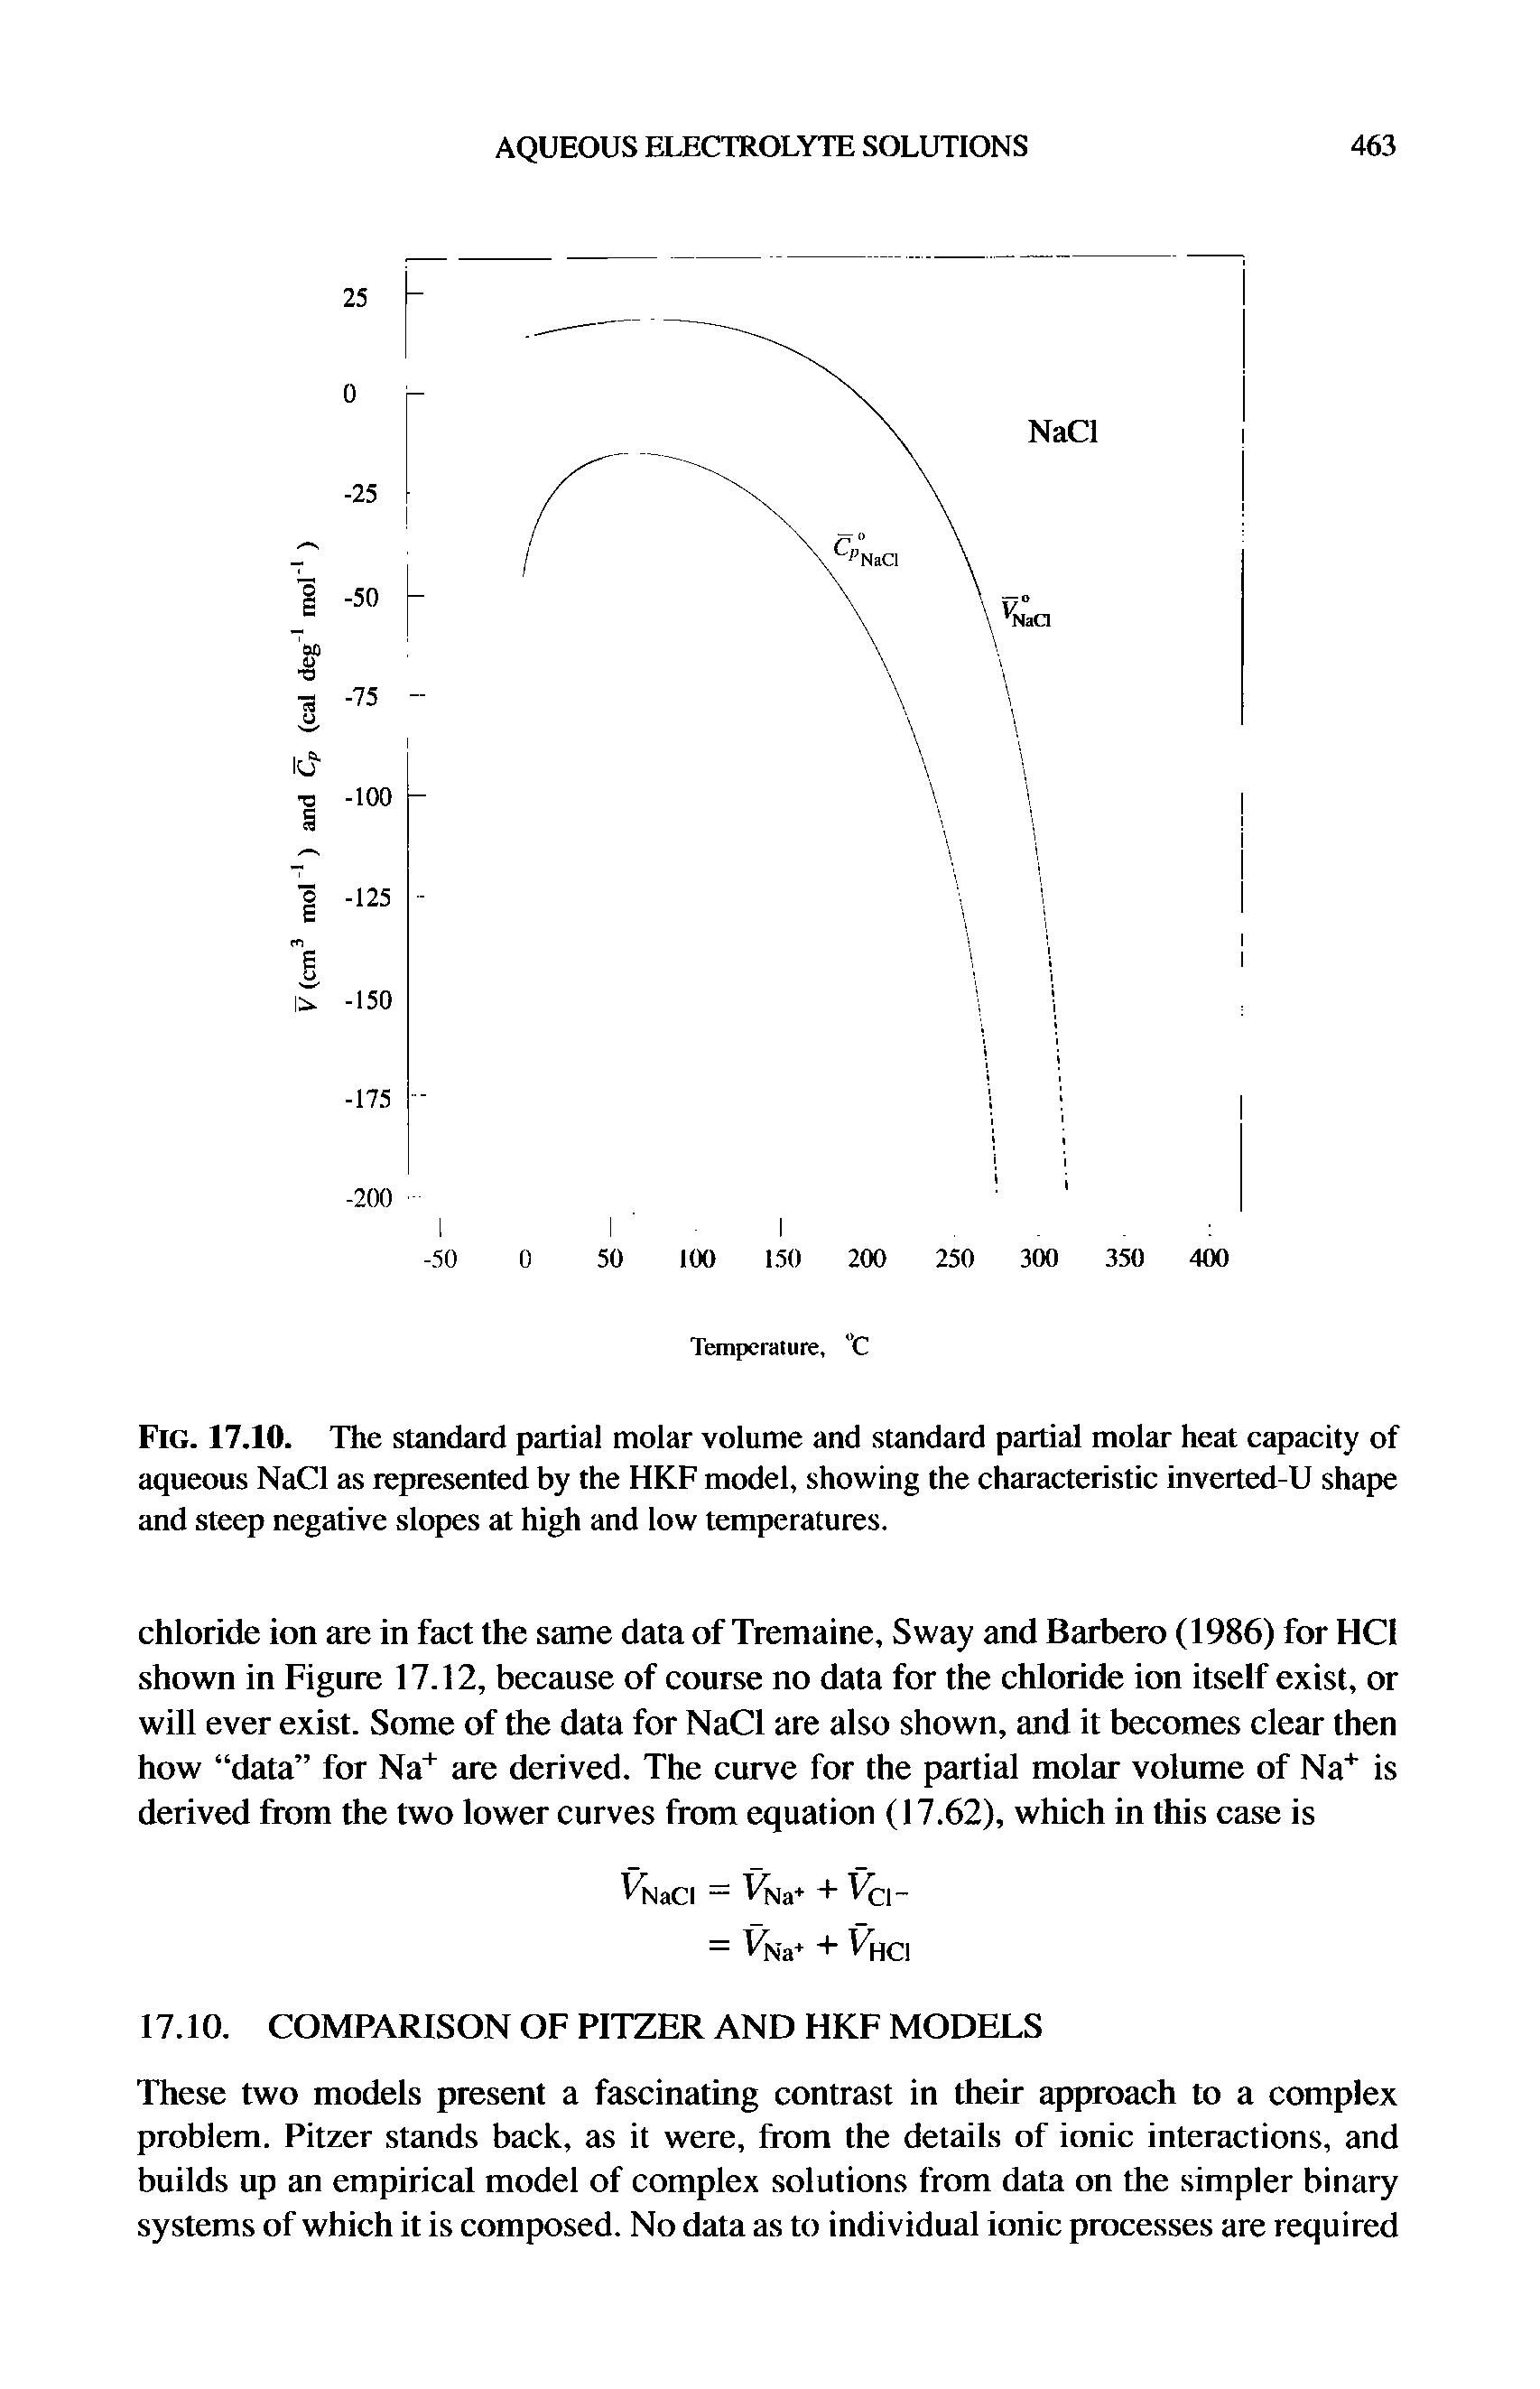 Fig. 17.10. The standard partial molar volume and standard partial molar heat capacity of aqueous NaCl as represented by the HKF model, showing the characteristic inverted-U shape and steep negative slopes at high and low temperatures.